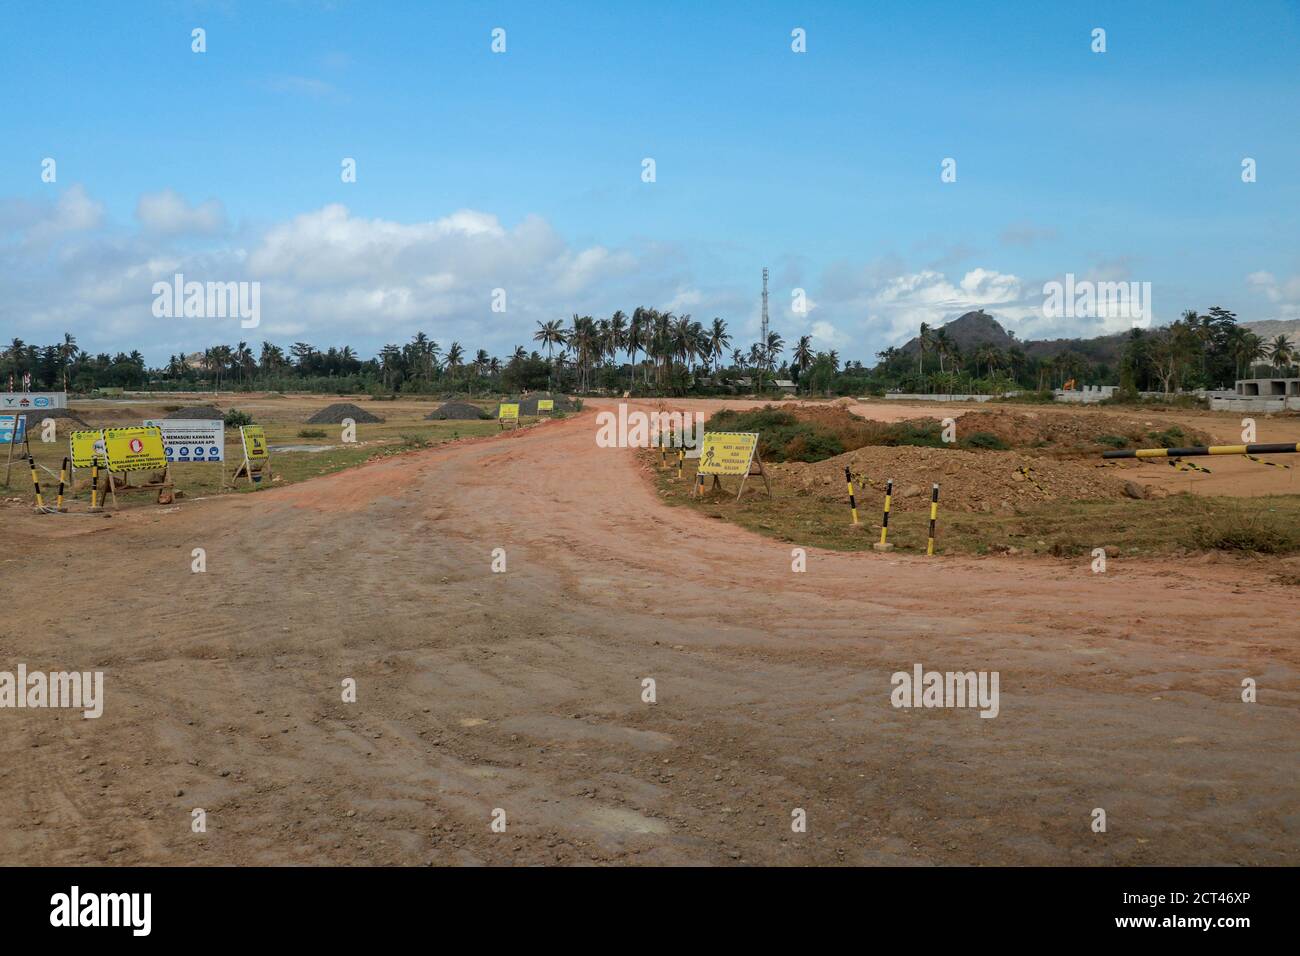 Construction of a complex on the Motogp Mandalika circuit, West Nusa Tenggara, Lombok, Indonesia. Banners with a plan of the area and the racing Stock Photo